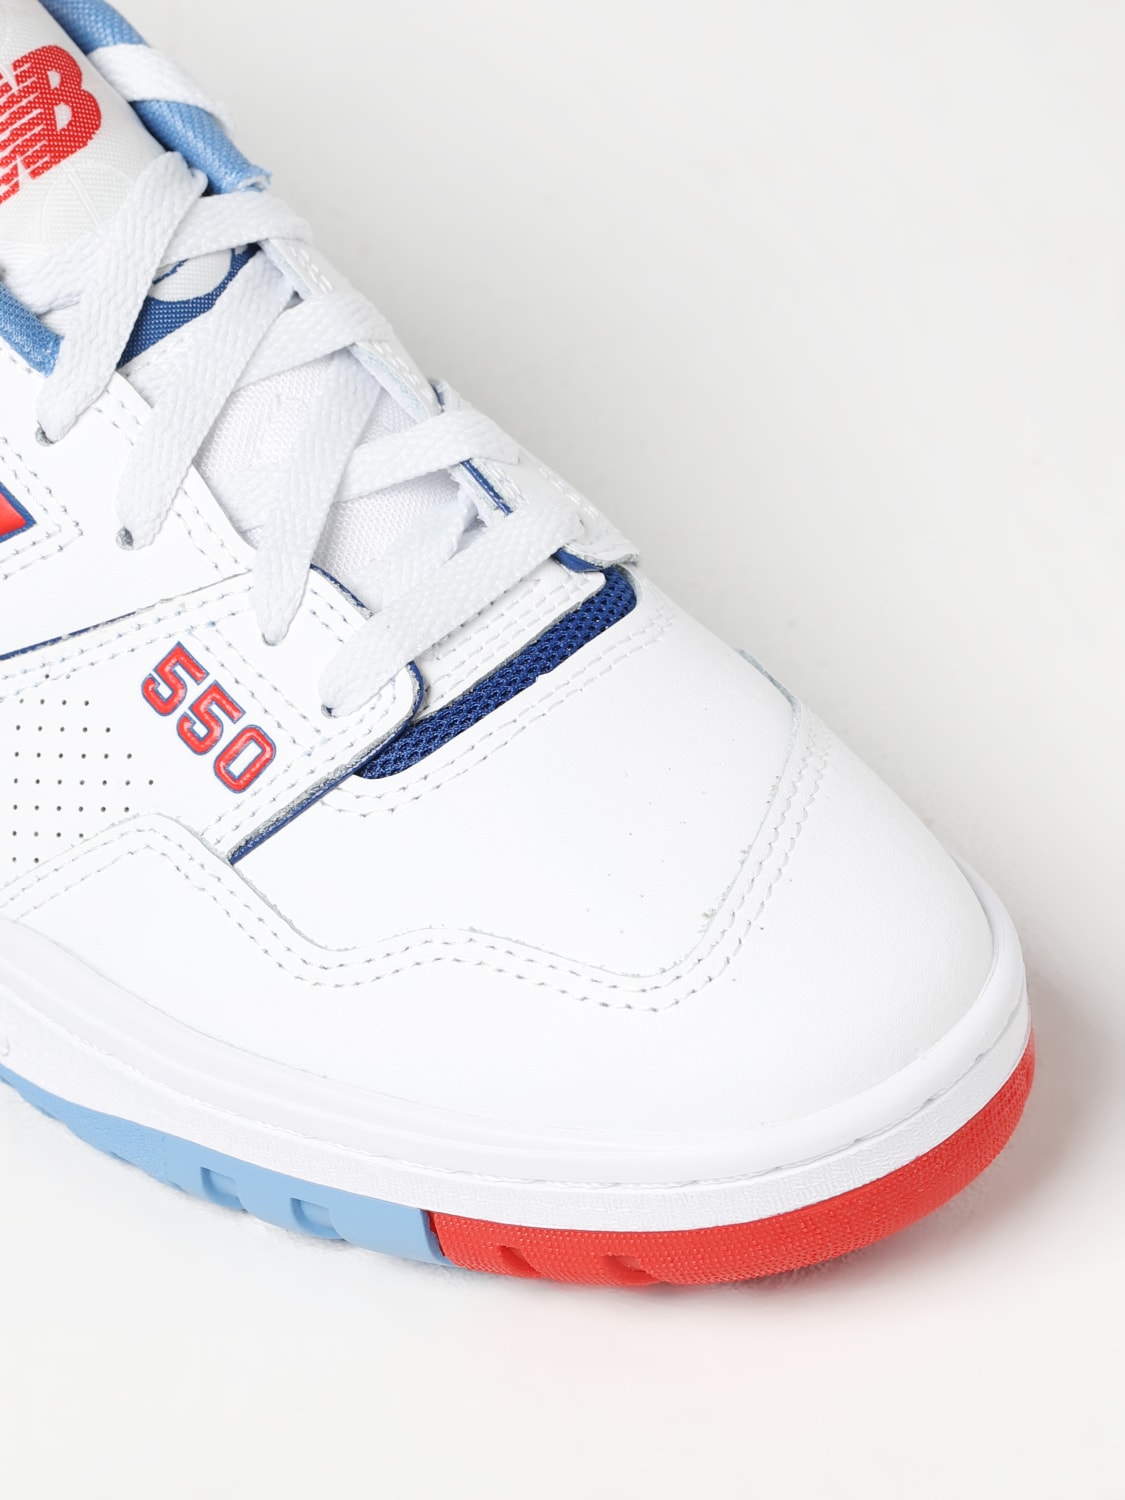 New Balance 550 White/Blue/Red BB550NCH